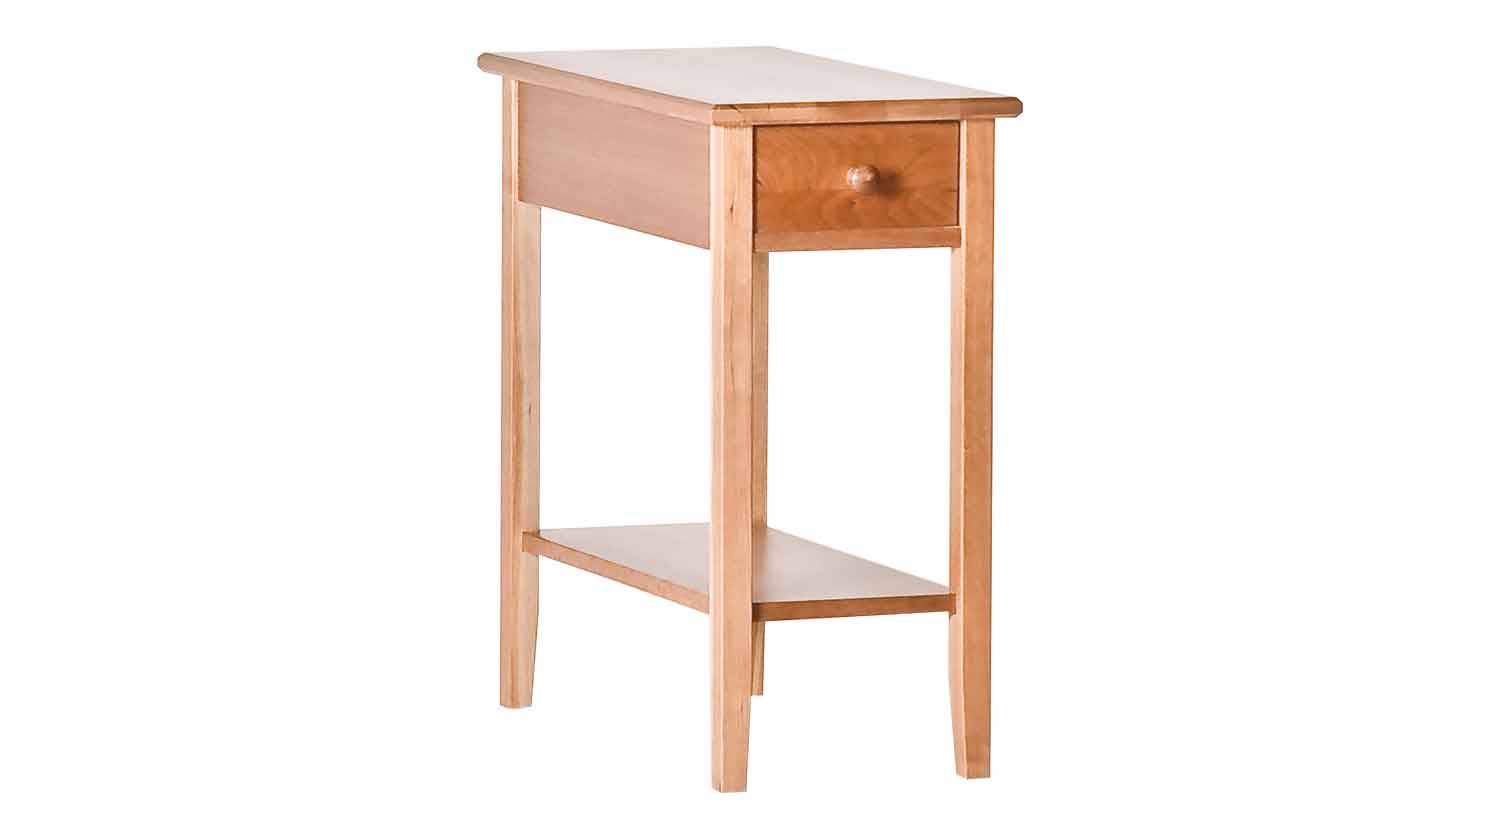 delightful unique small accent tables outdoor storage glass for tall cabinet room target antique modern and threshold round gold white living furniture kijiji benc table ott tan